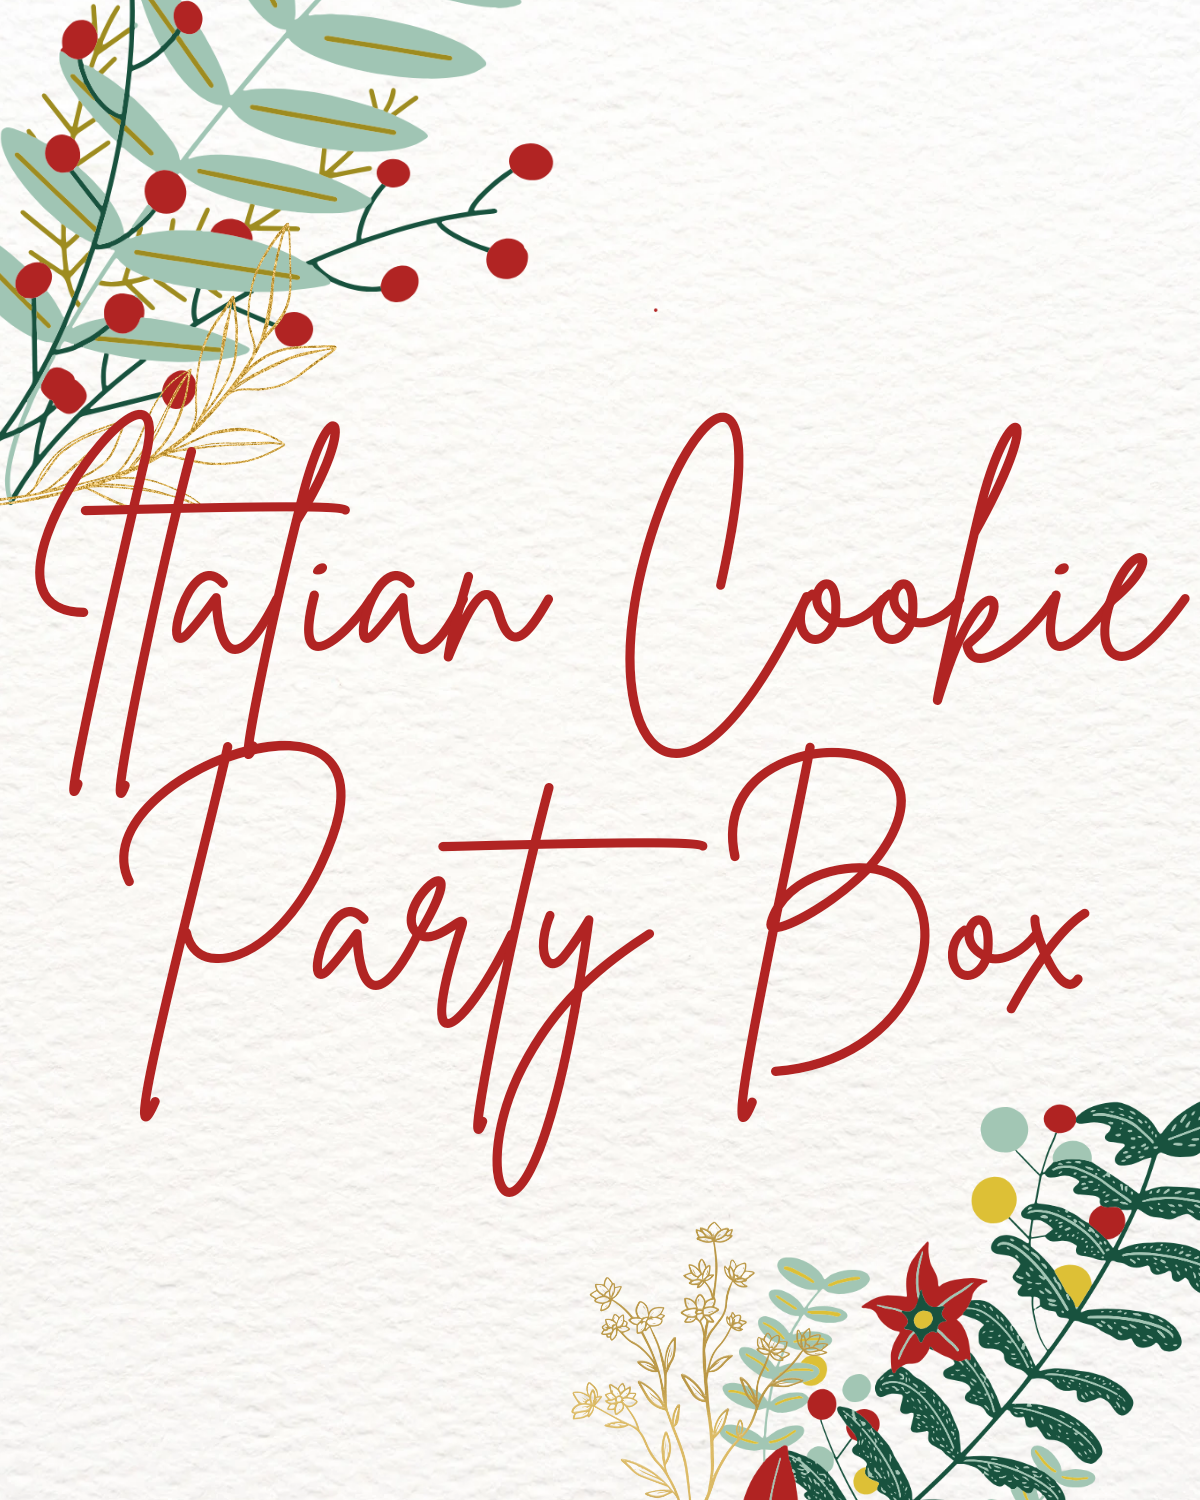 Italian Cookie Party Box (Christmas)